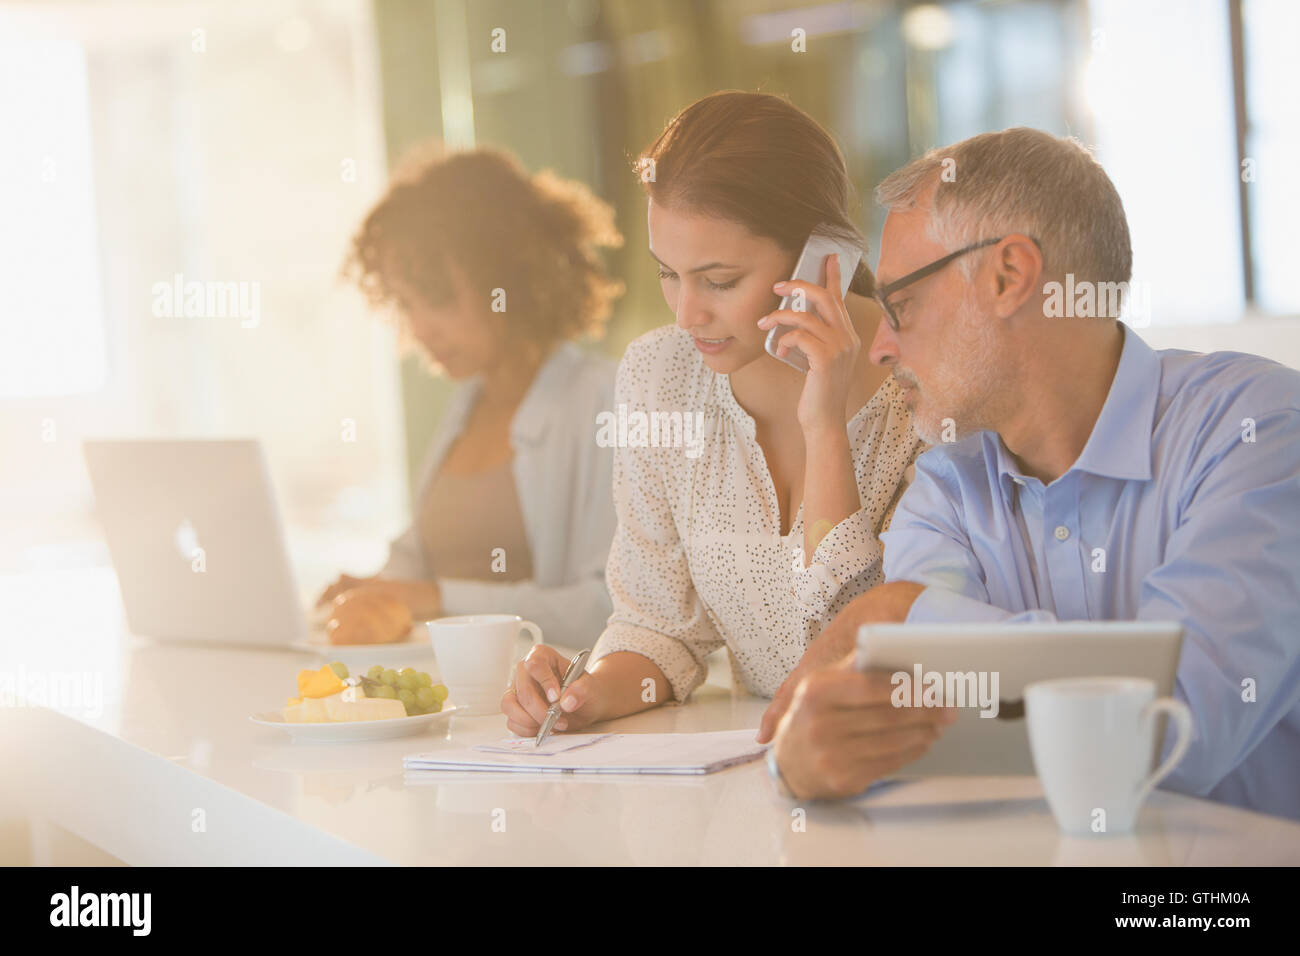 Business people drinking coffee and working at counter Stock Photo